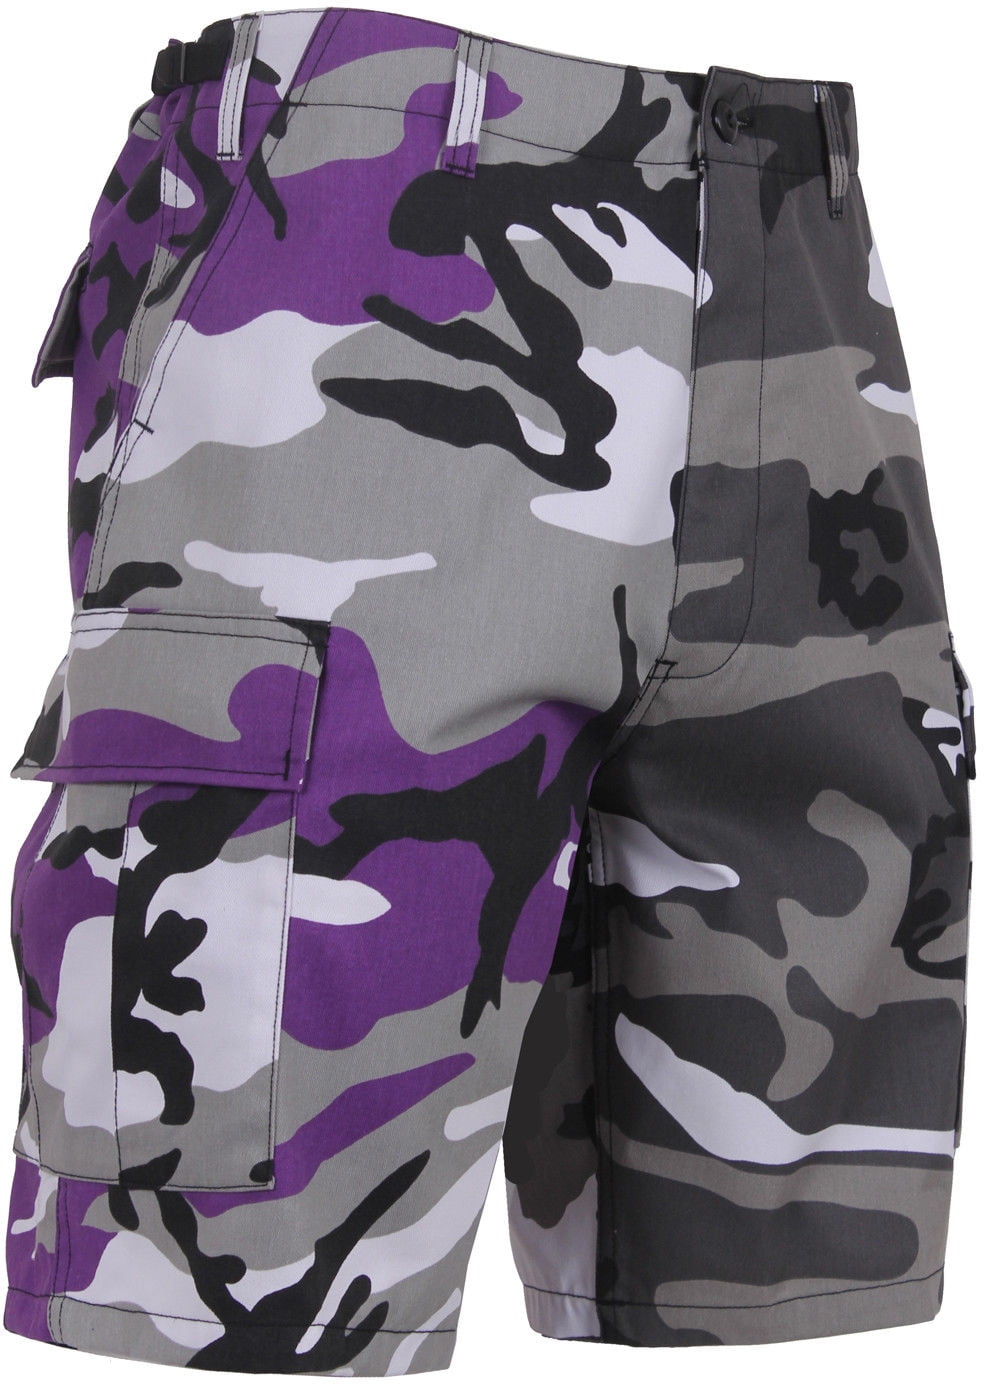 Mens Army Military Style BDU Shorts Casual Camo Work Cargo Shorts 